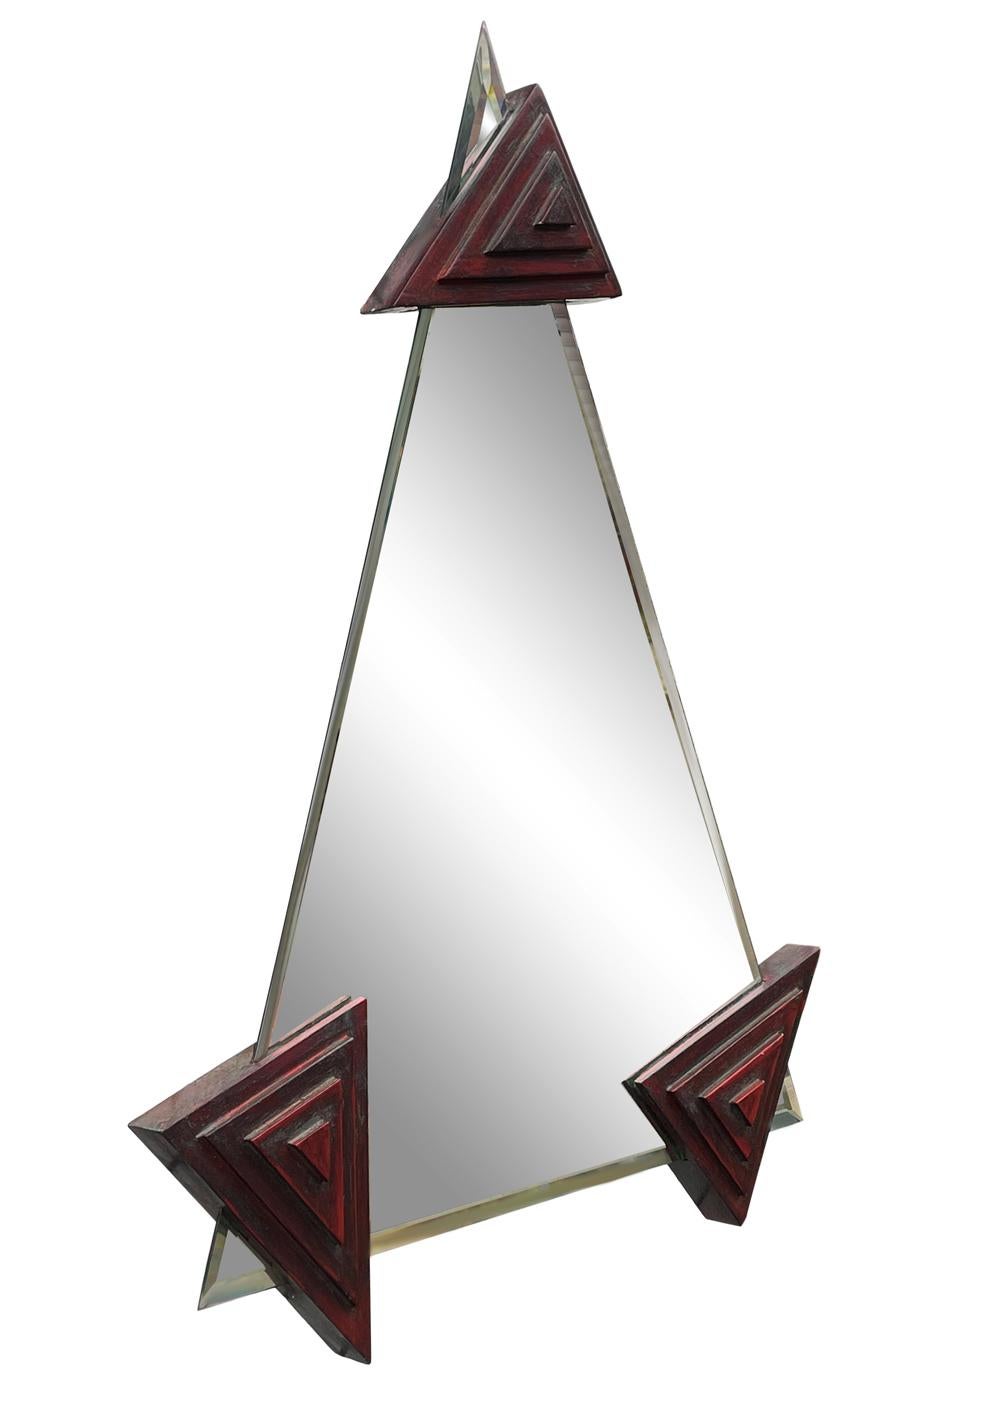 An eye catching post modern design mirror from Italy circa 1980s. It features a floating mirror design with stacked triangular brackets in red and gray.